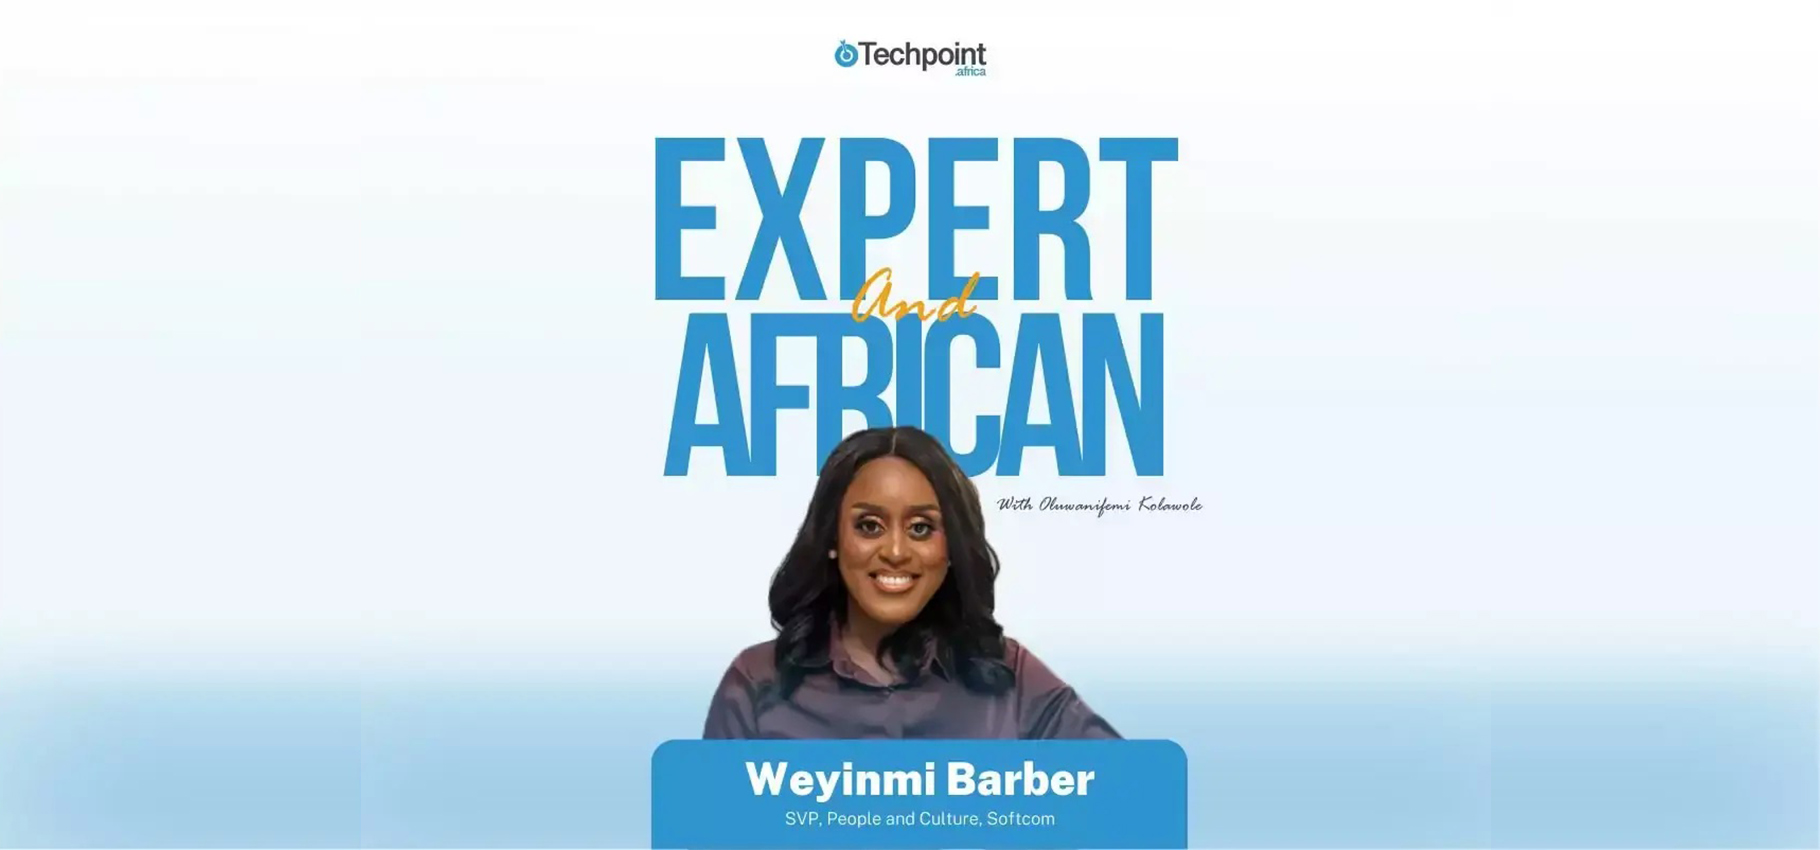 Softcom’s Weyinmi Barber is making HR desirable one startup at a time